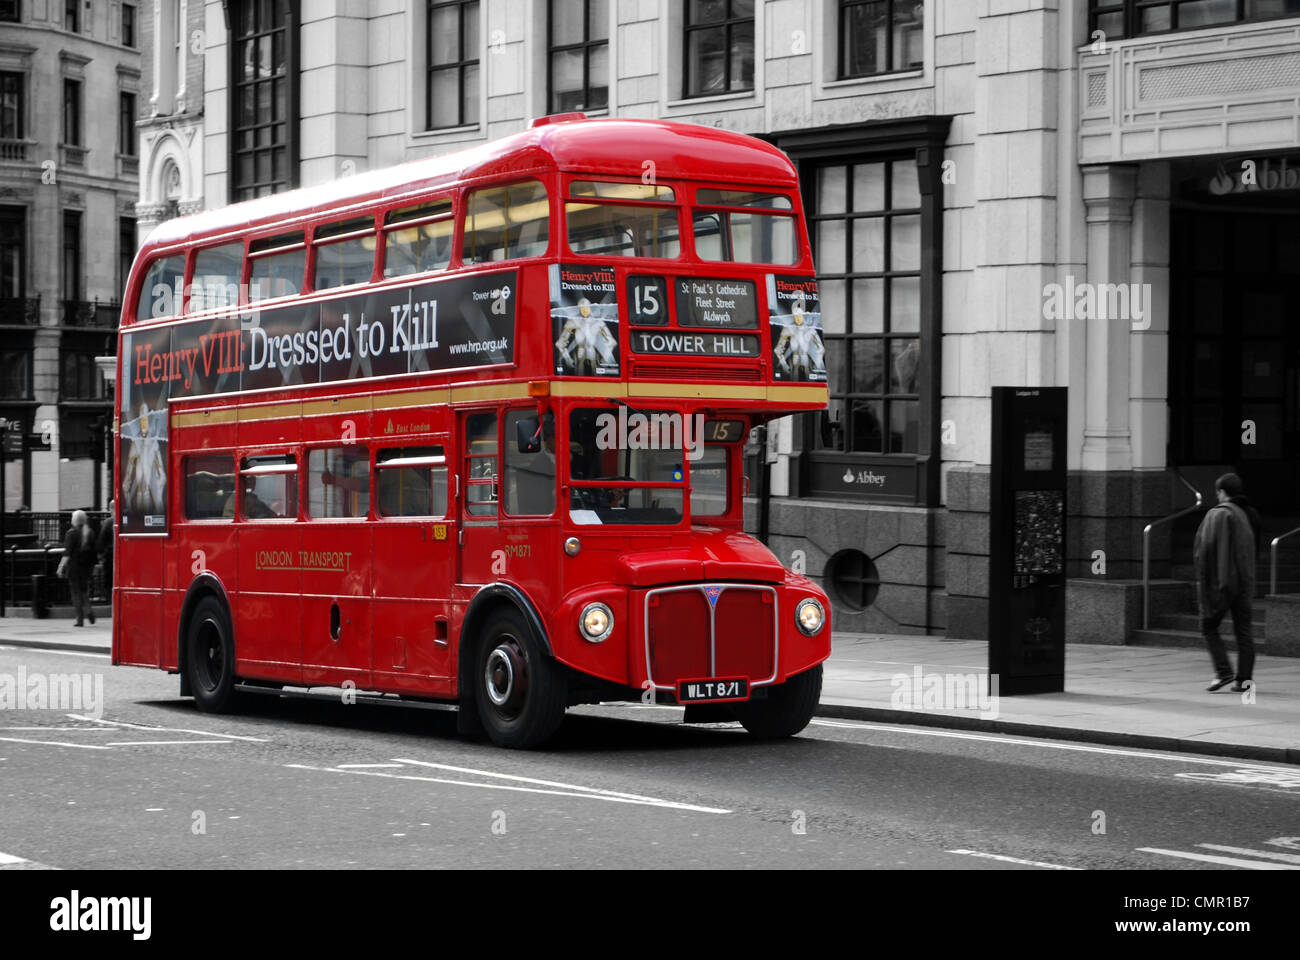 Routemaster on Lugate Hill, City of London. Bus in color colour against a monochrome background Stock Photo